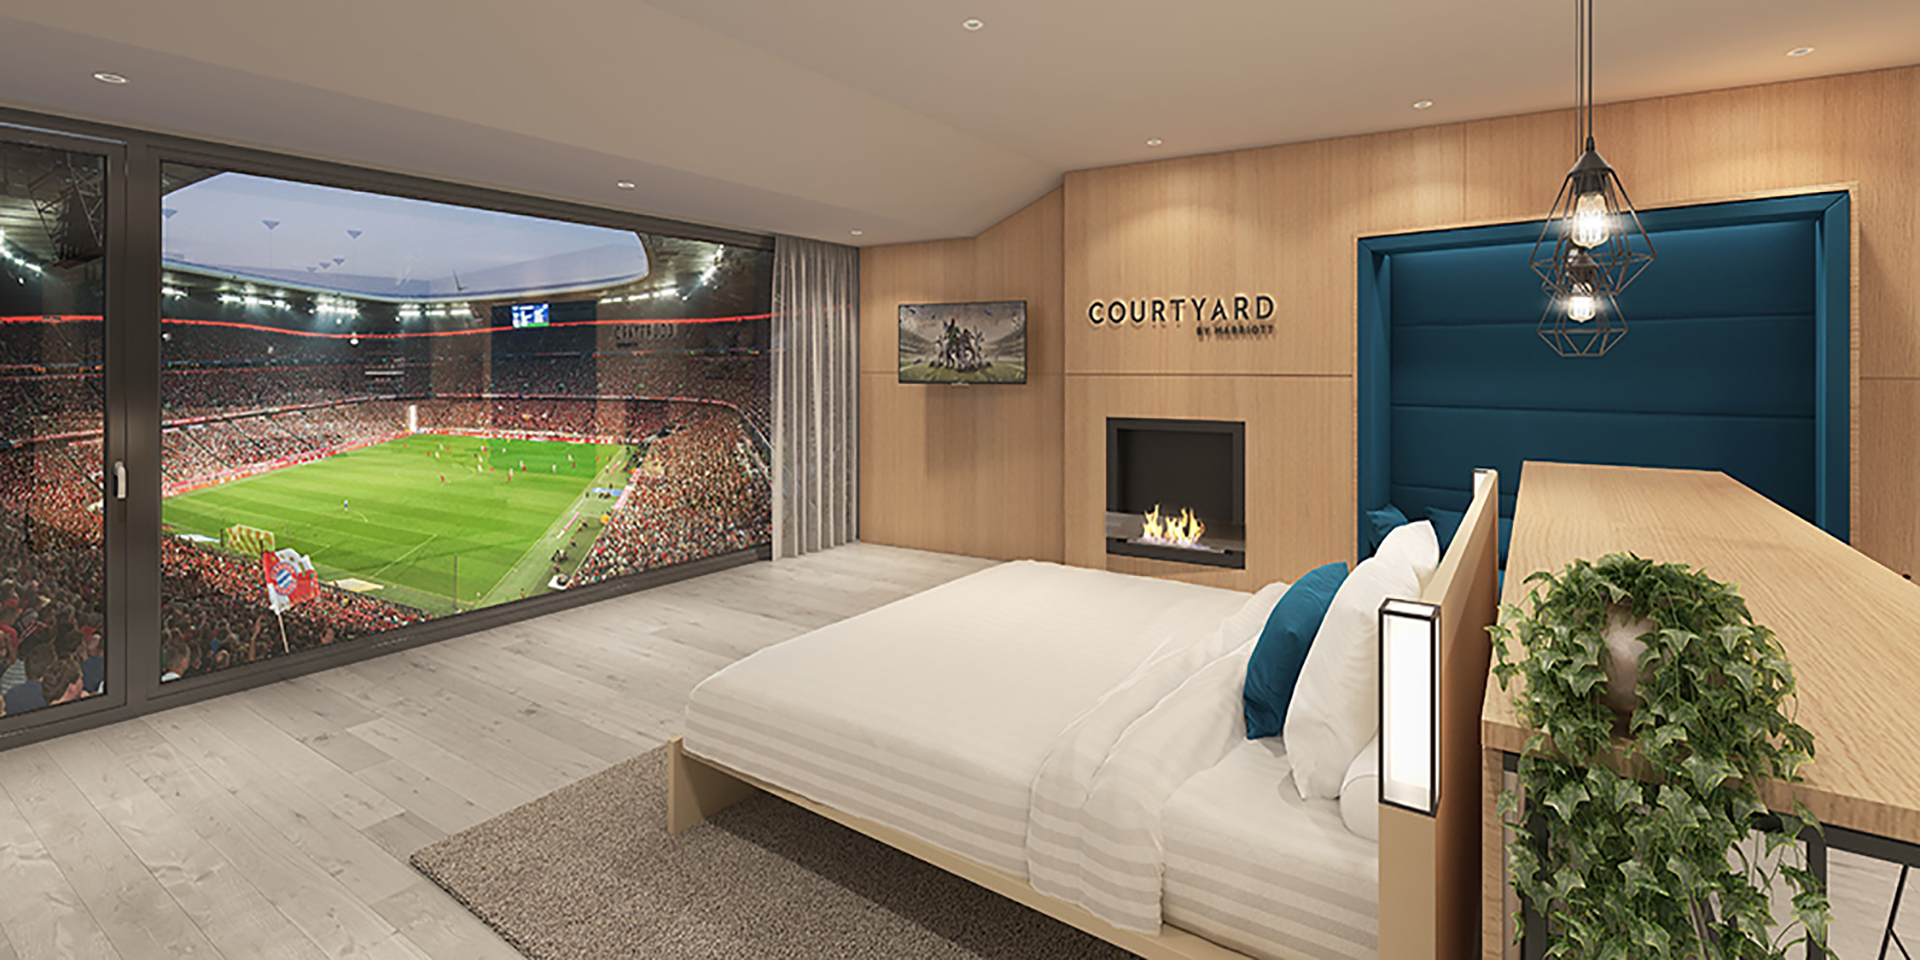 A concept image of the custom-built executive box that is to be built at Bayern Munich's Allianz Arena